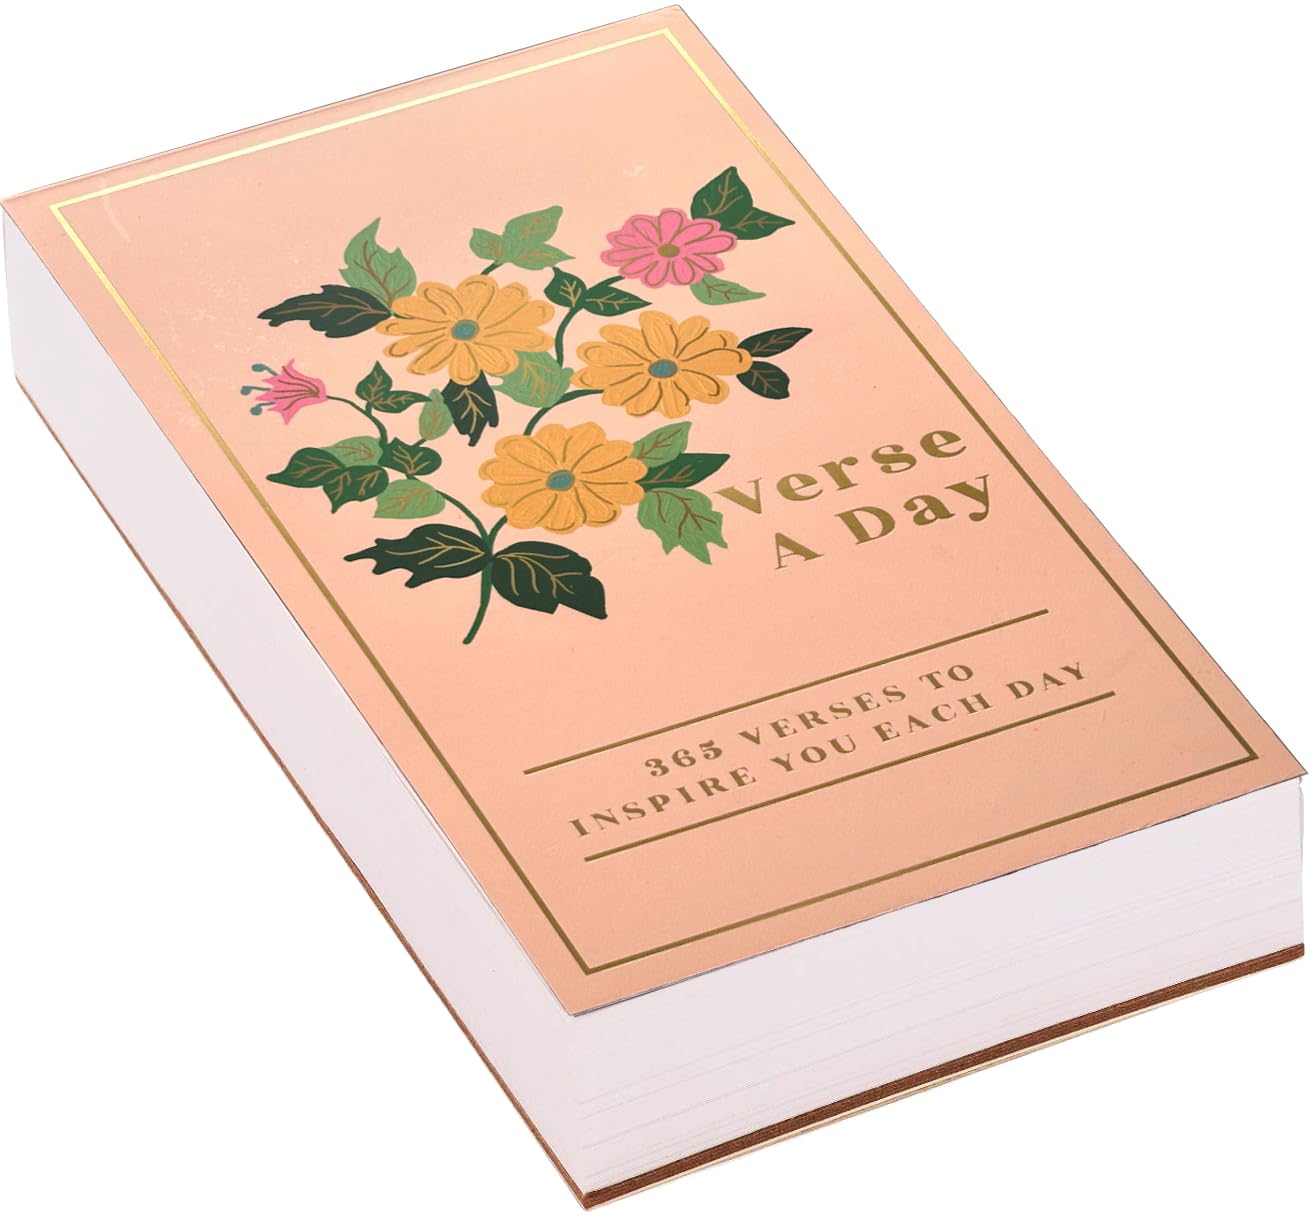 Eccolo Christian List Note Pad - A Verse a Day Bible Notebook Pad with 365 Inspirational Bible Verses